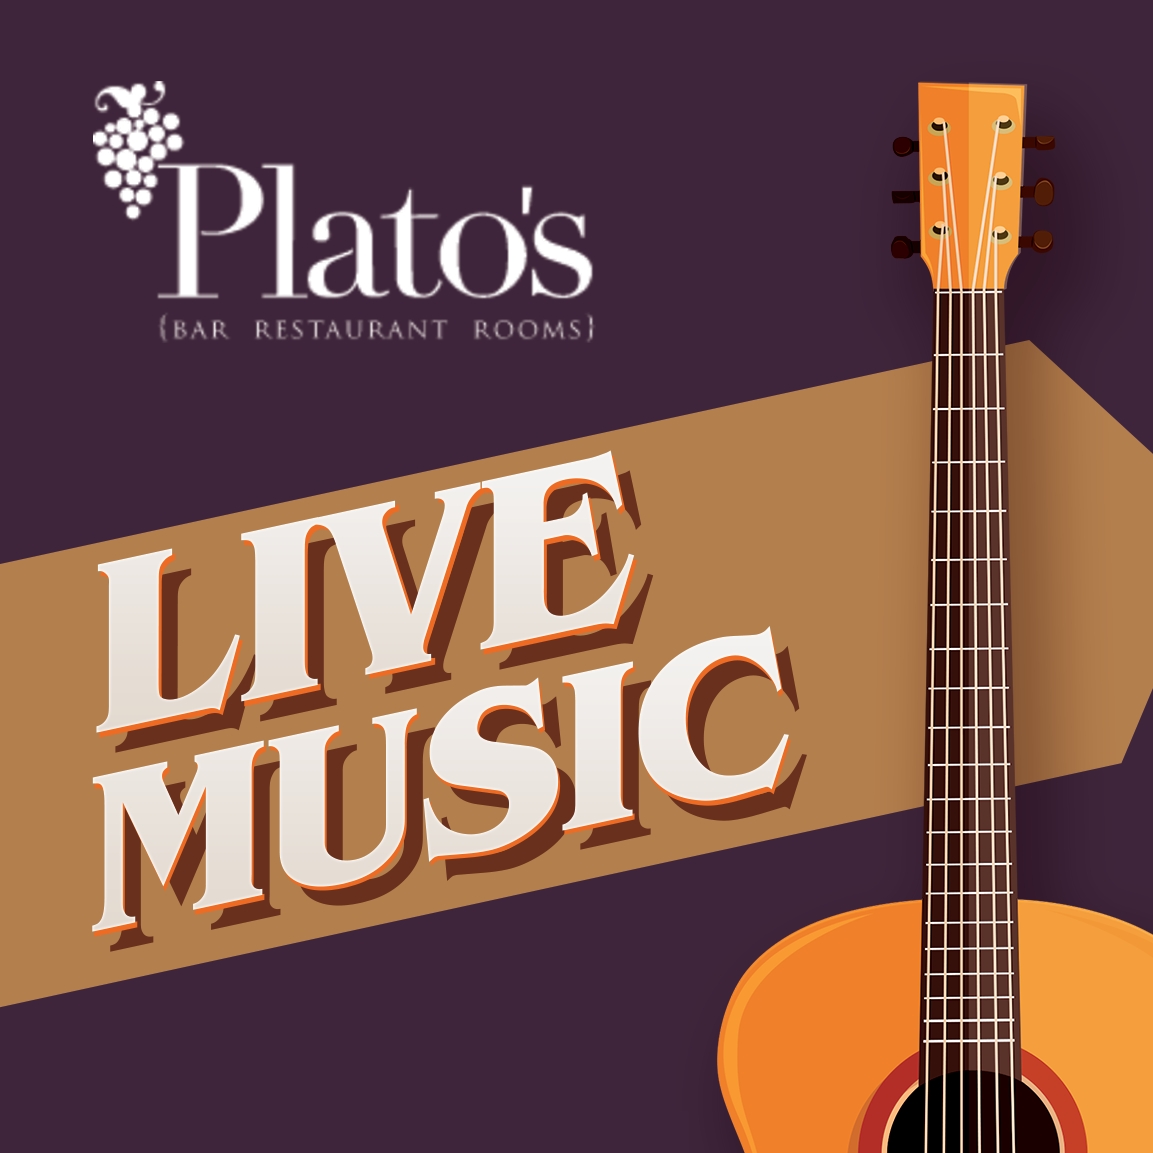 Image with a deep purple background with the platos logo in the top left corner and then a banner with the words "live music" with a cut of image of a clip art guitar in the bottom left corner